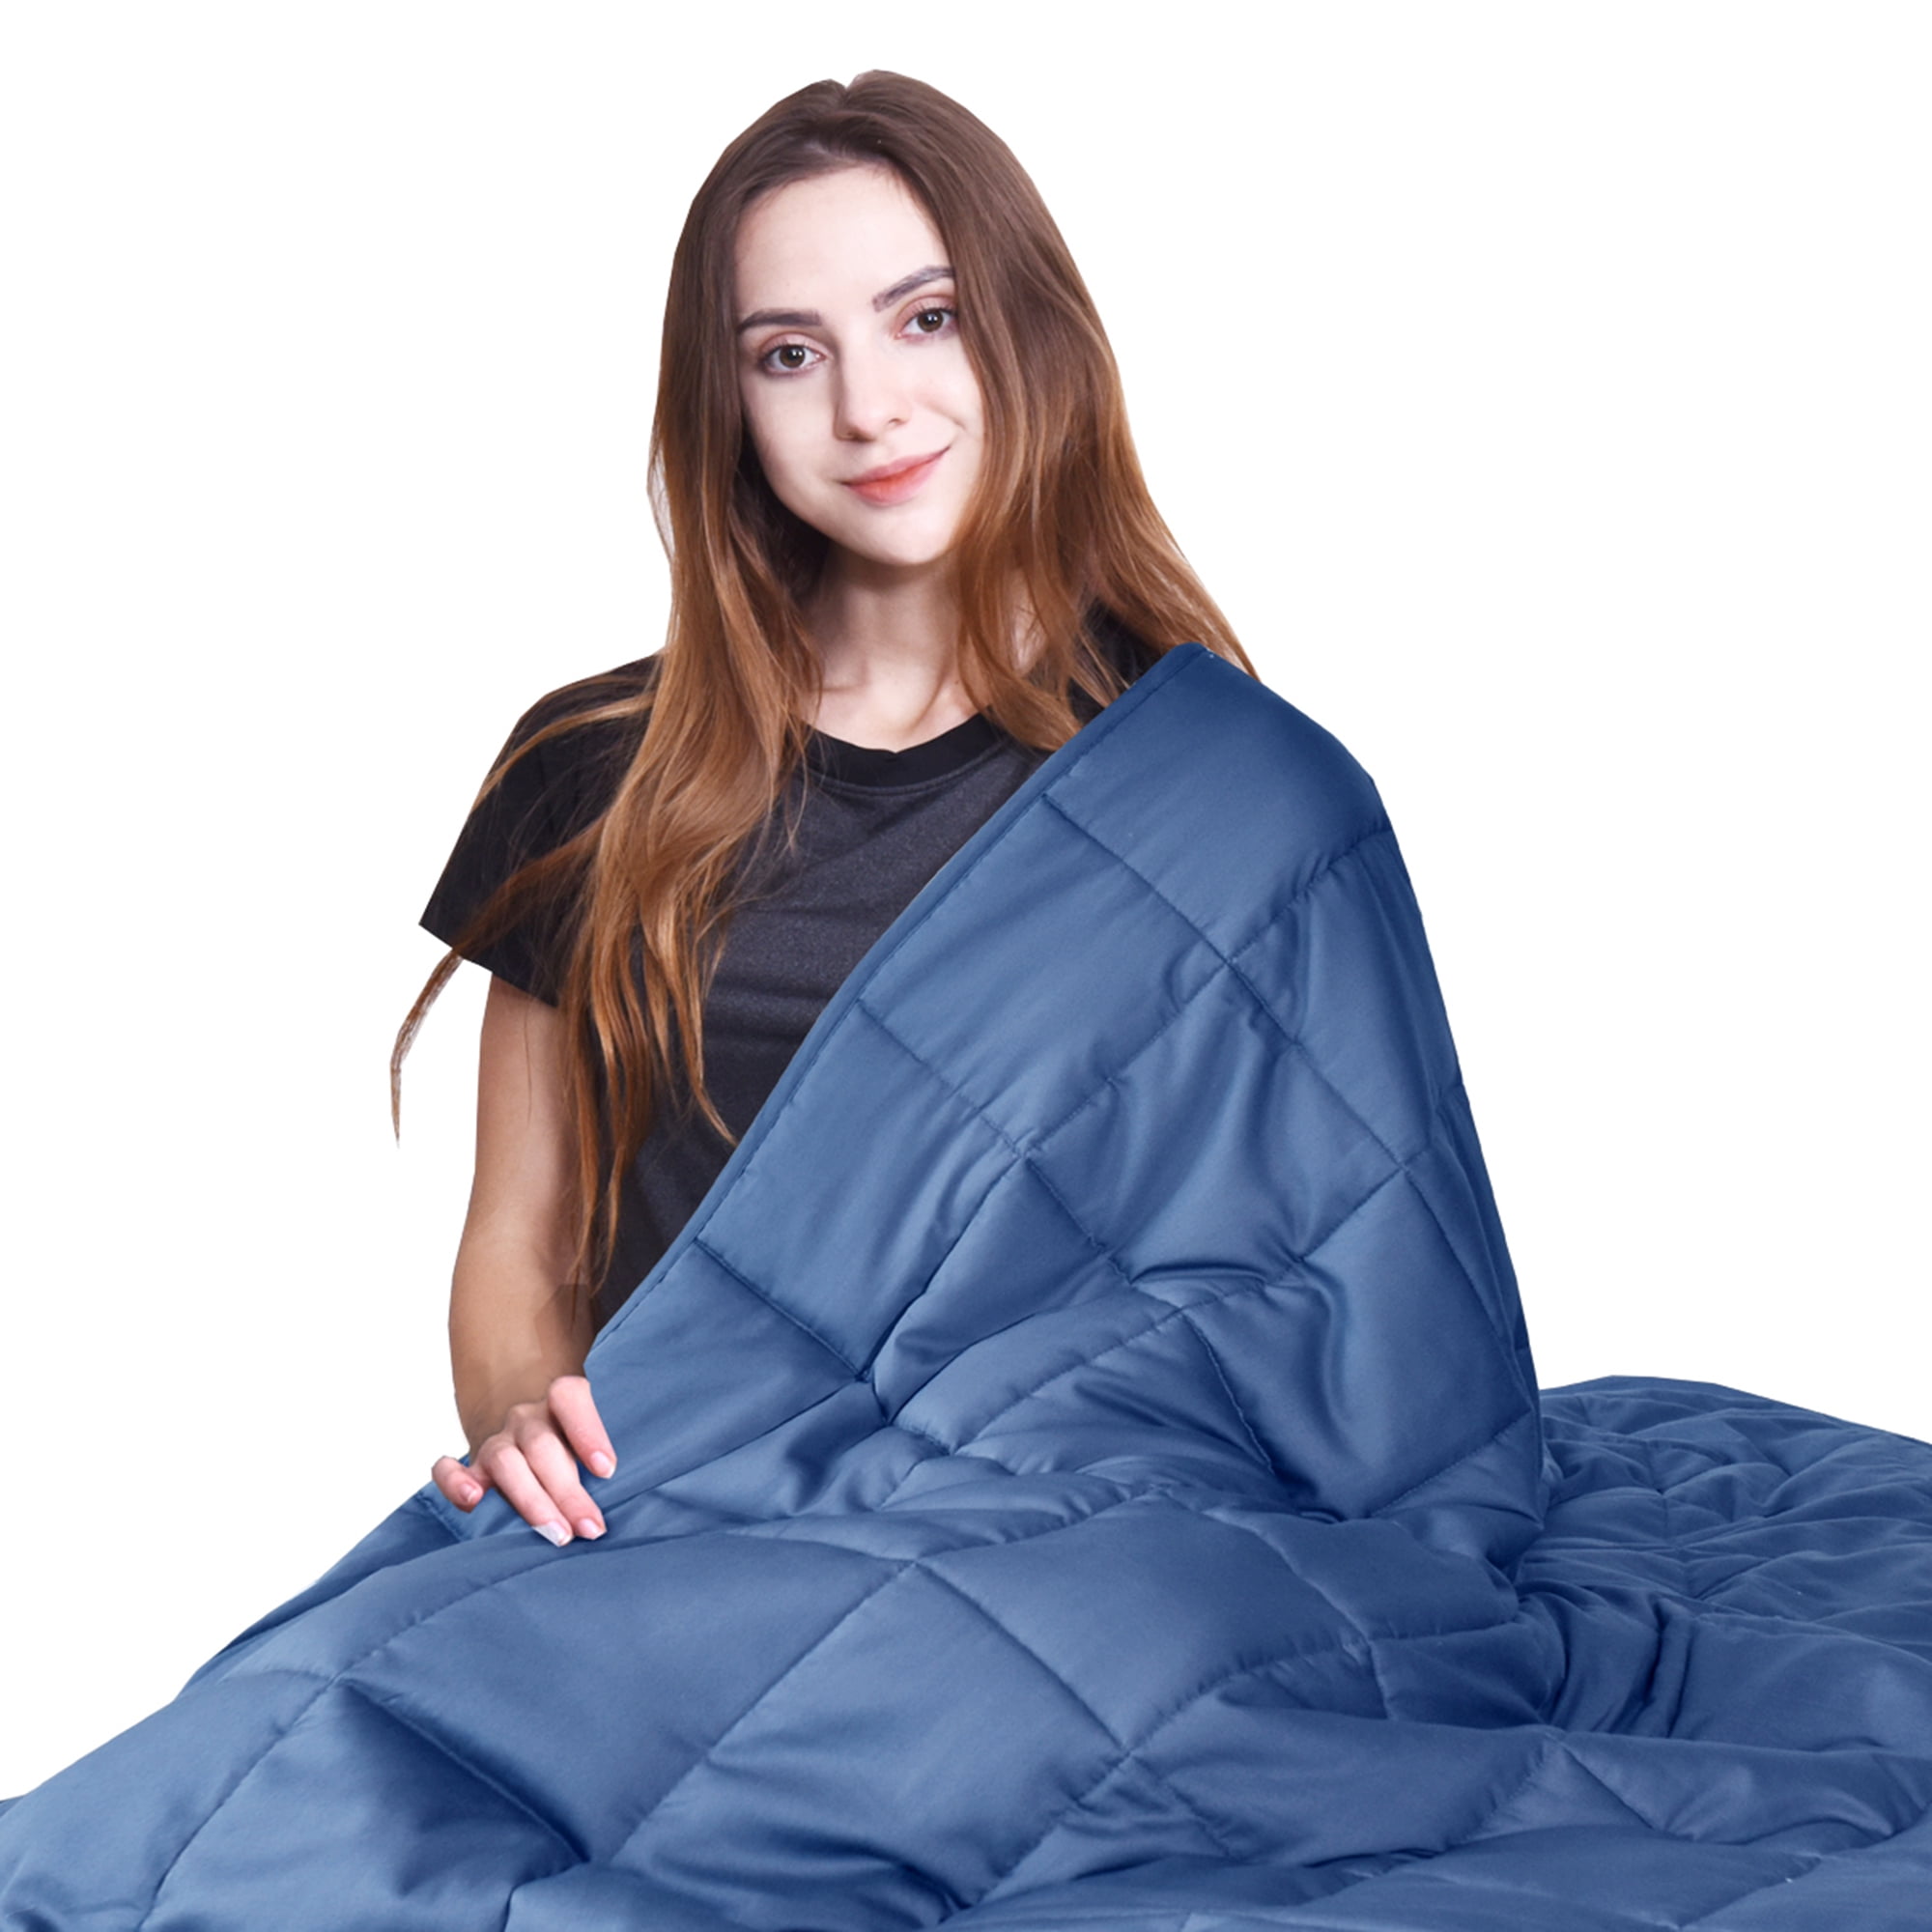 Details about   60x80 15lbs Premium Cooling Heavy Weighted Blanket Cool reathable Fabric US SHIP